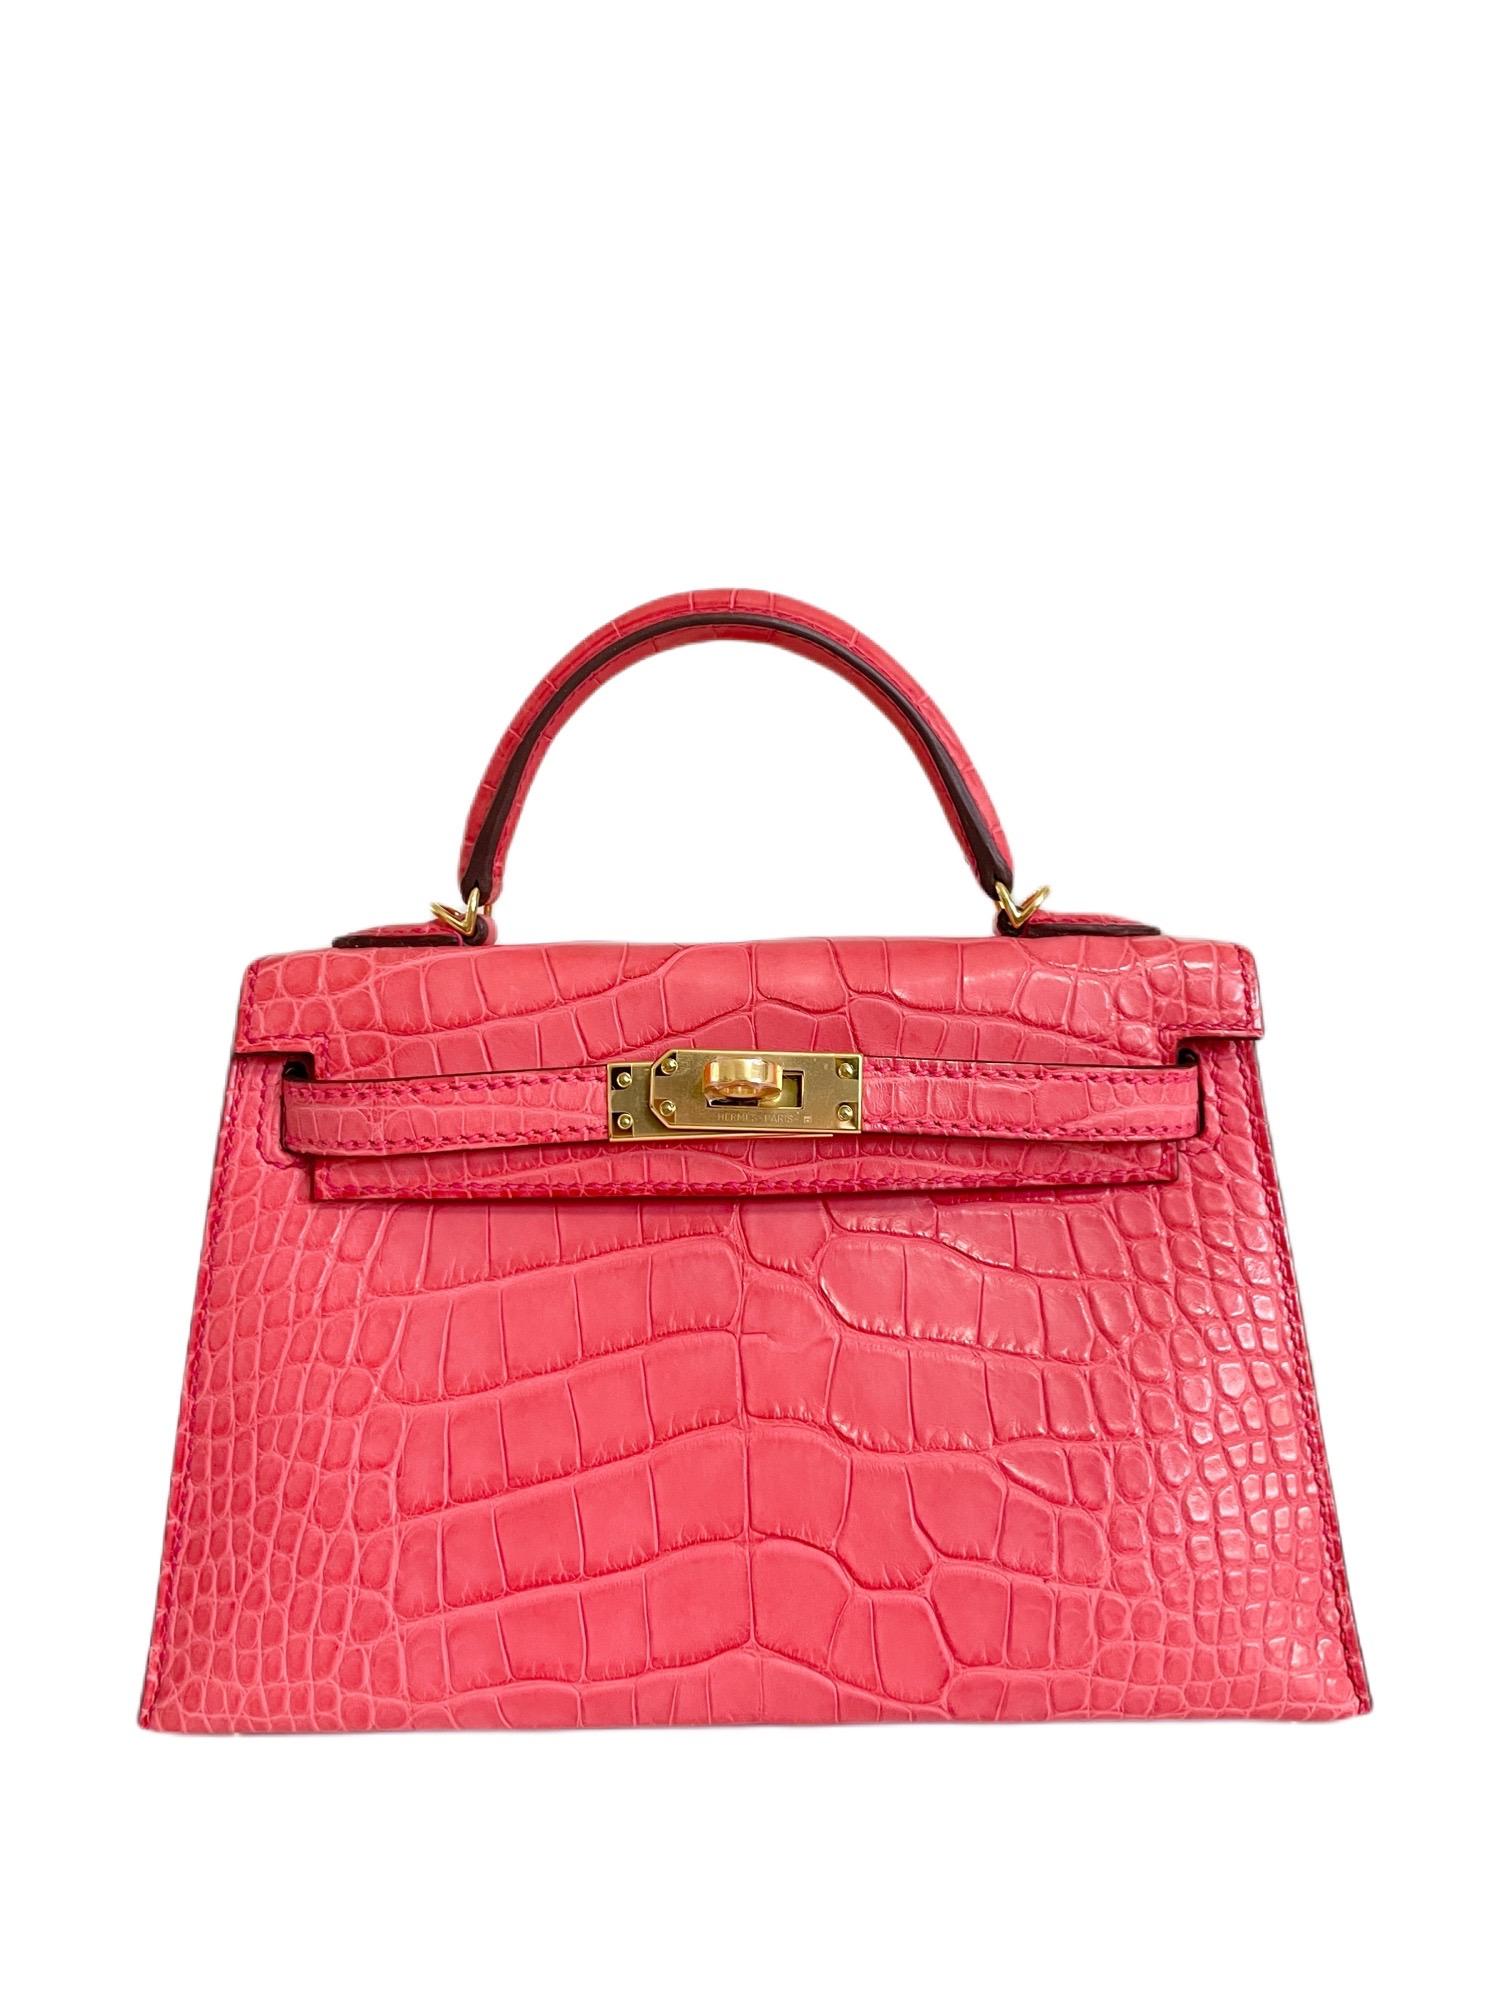 New Rare Hermes Kelly Mini 20 Alligator Bougainvillea Pink Gold Hardware. Full set with copy of receipt and cites. Y Stamp 2020. 

Shop with Confidence from Lux Addicts. Authenticity Guaranteed! 